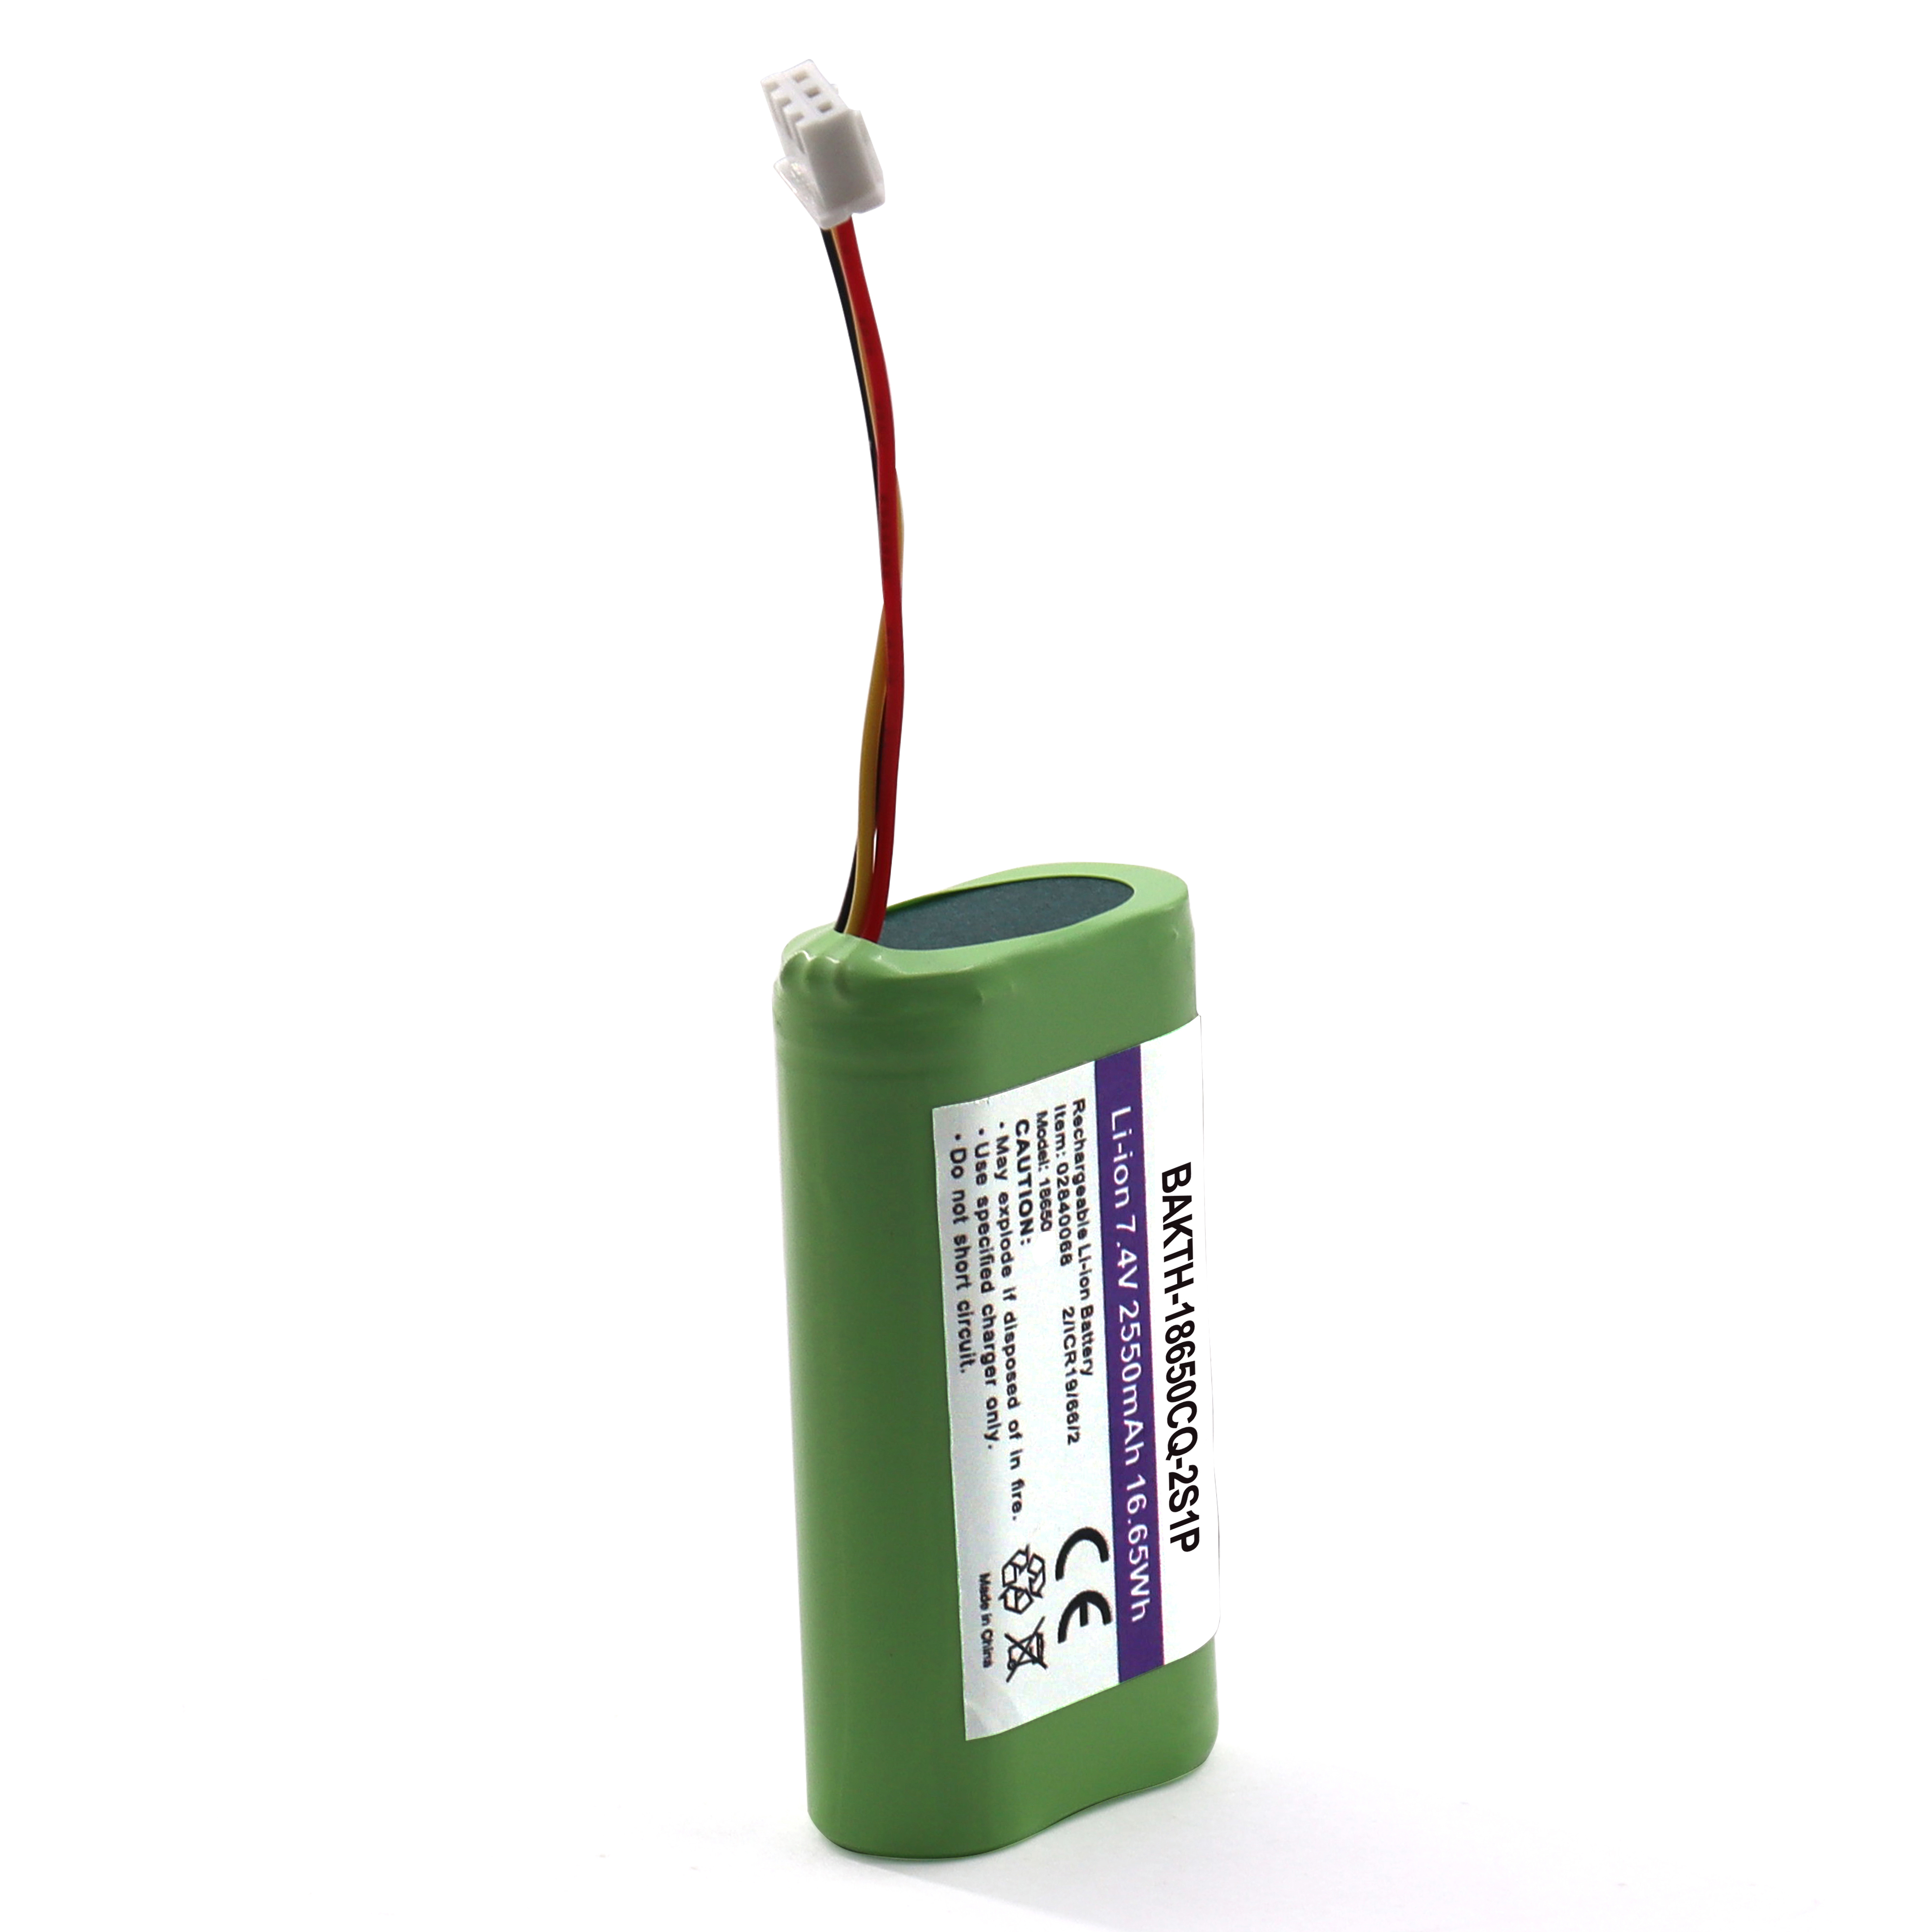 BAKTH-18650CQ-2S1P 7.4V 2550mAh Hot Sale Rechargeable Lithium ion Battery Pack Customized Battery Pack for Electric Application Devices